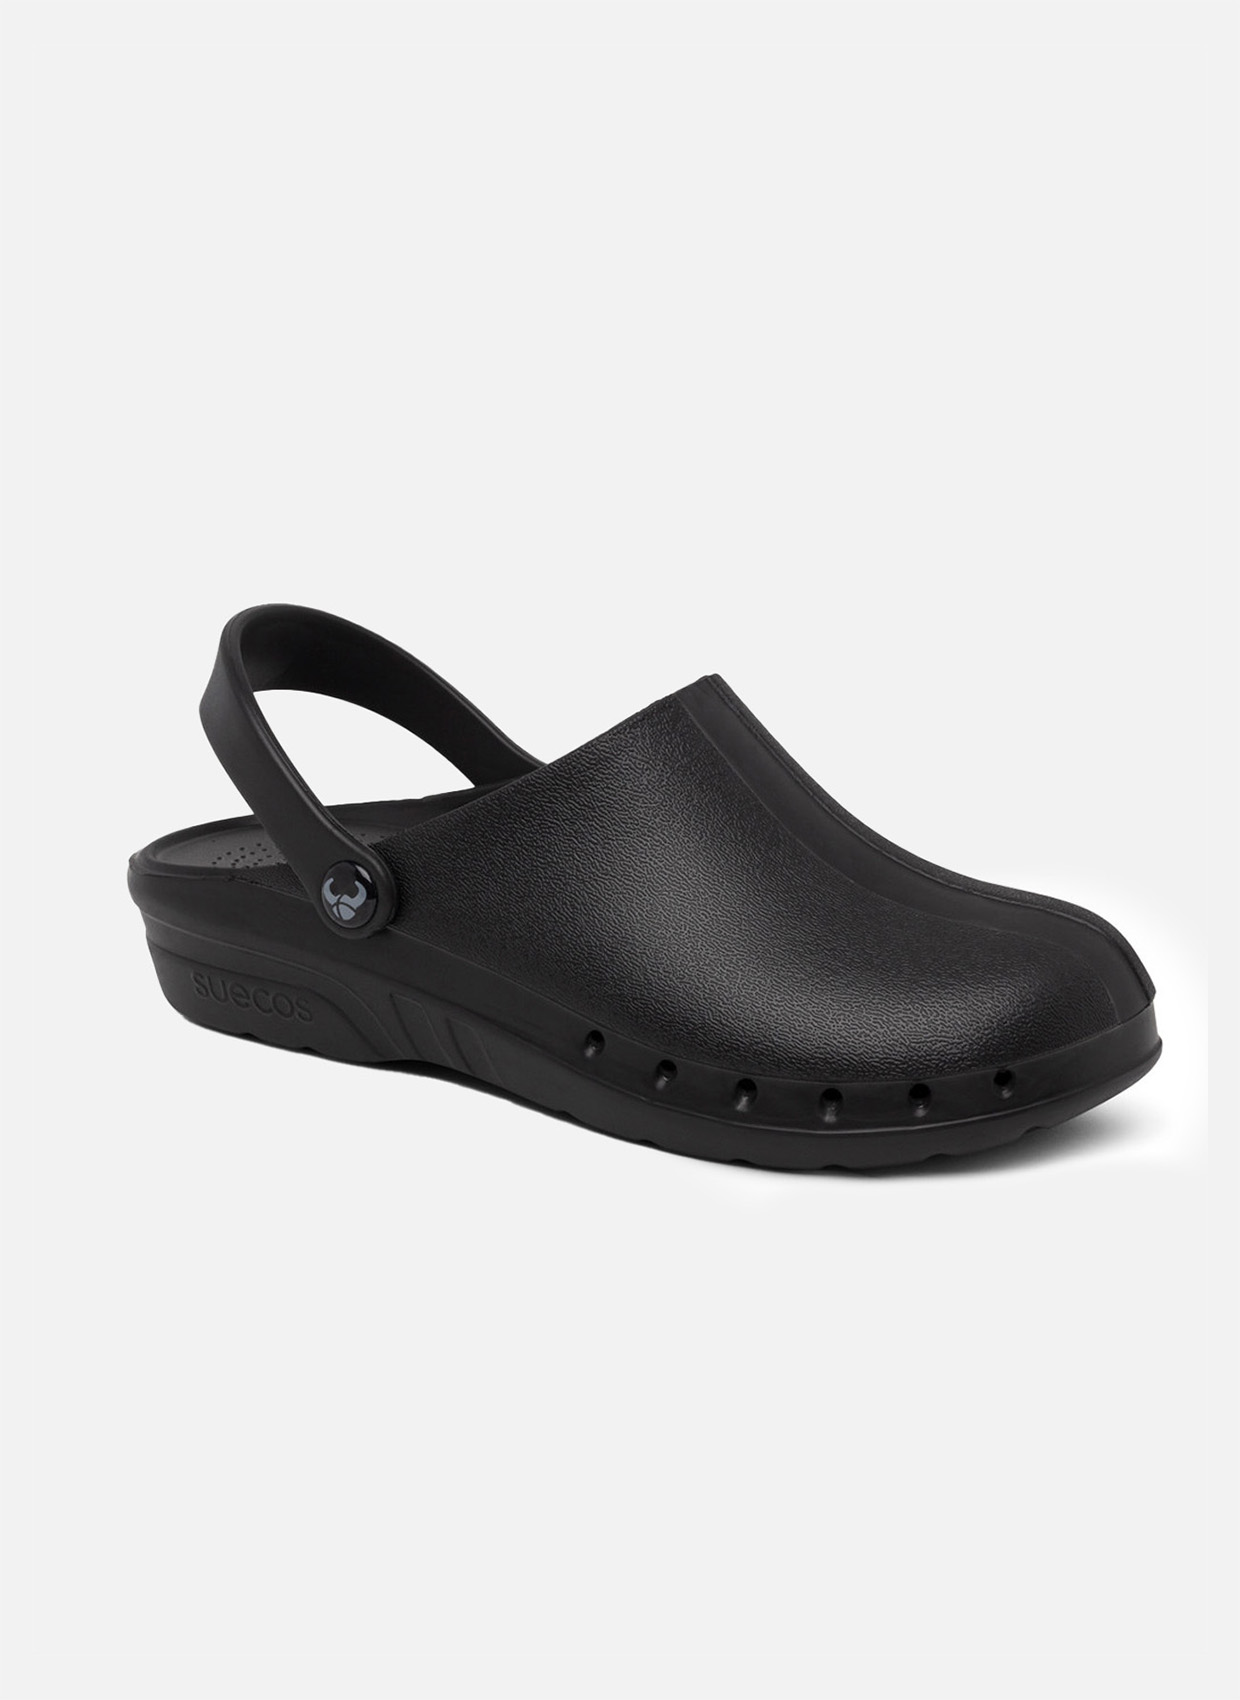 Suecos Oden Theatre Clogs and Nurses Shoes | Happythreads